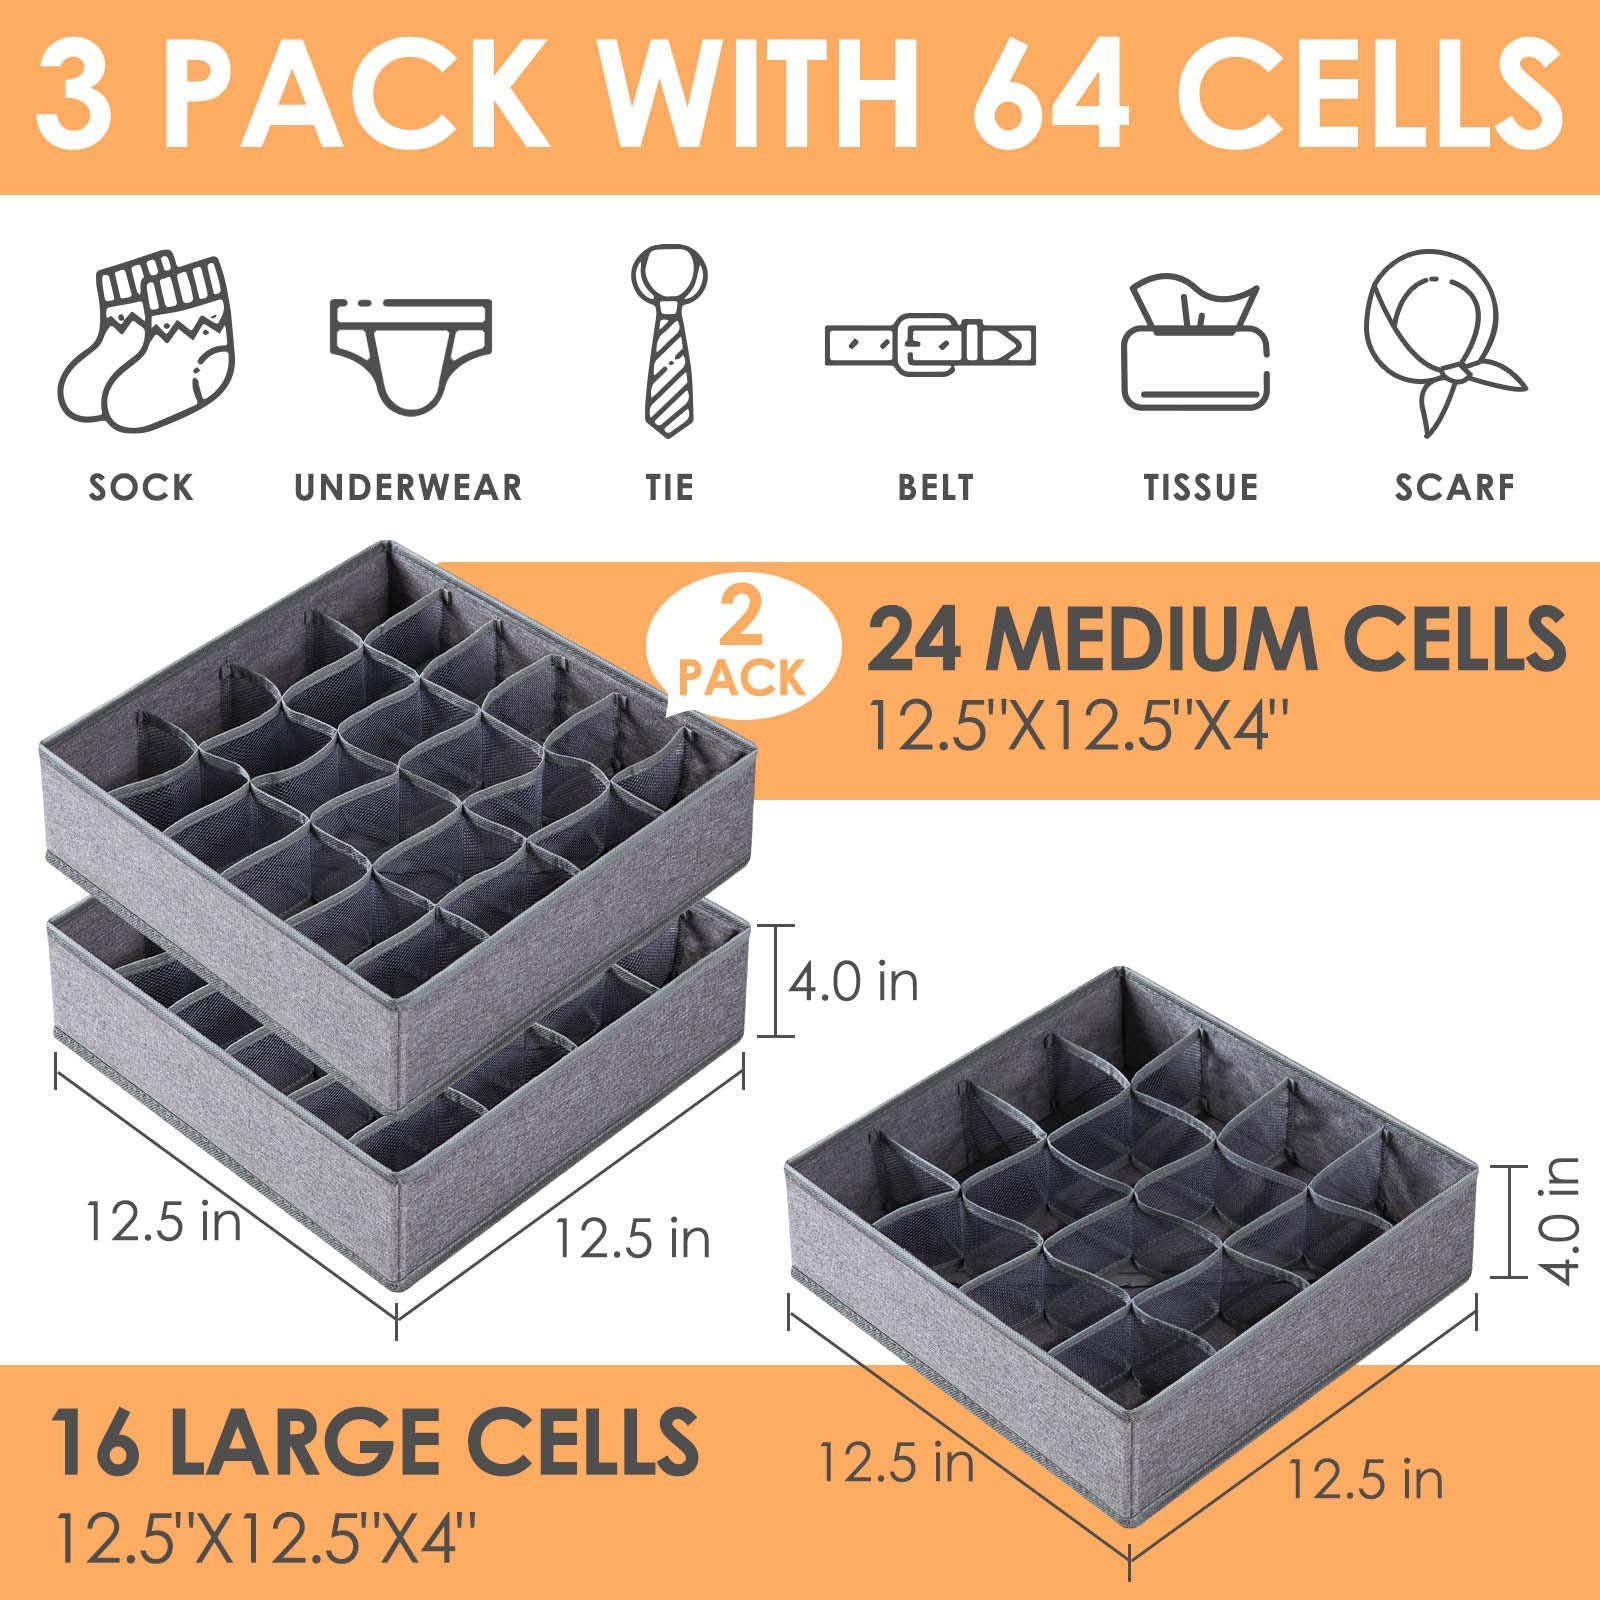 Criusia 3 Pack Sock Underwear Organizer Dividers, 64 Cell Fabric Foldable Cabinet Closet Organizers and Storage Boxes for Storing Socks, Underwear, Ties (16+24+24 Cell, Gray)